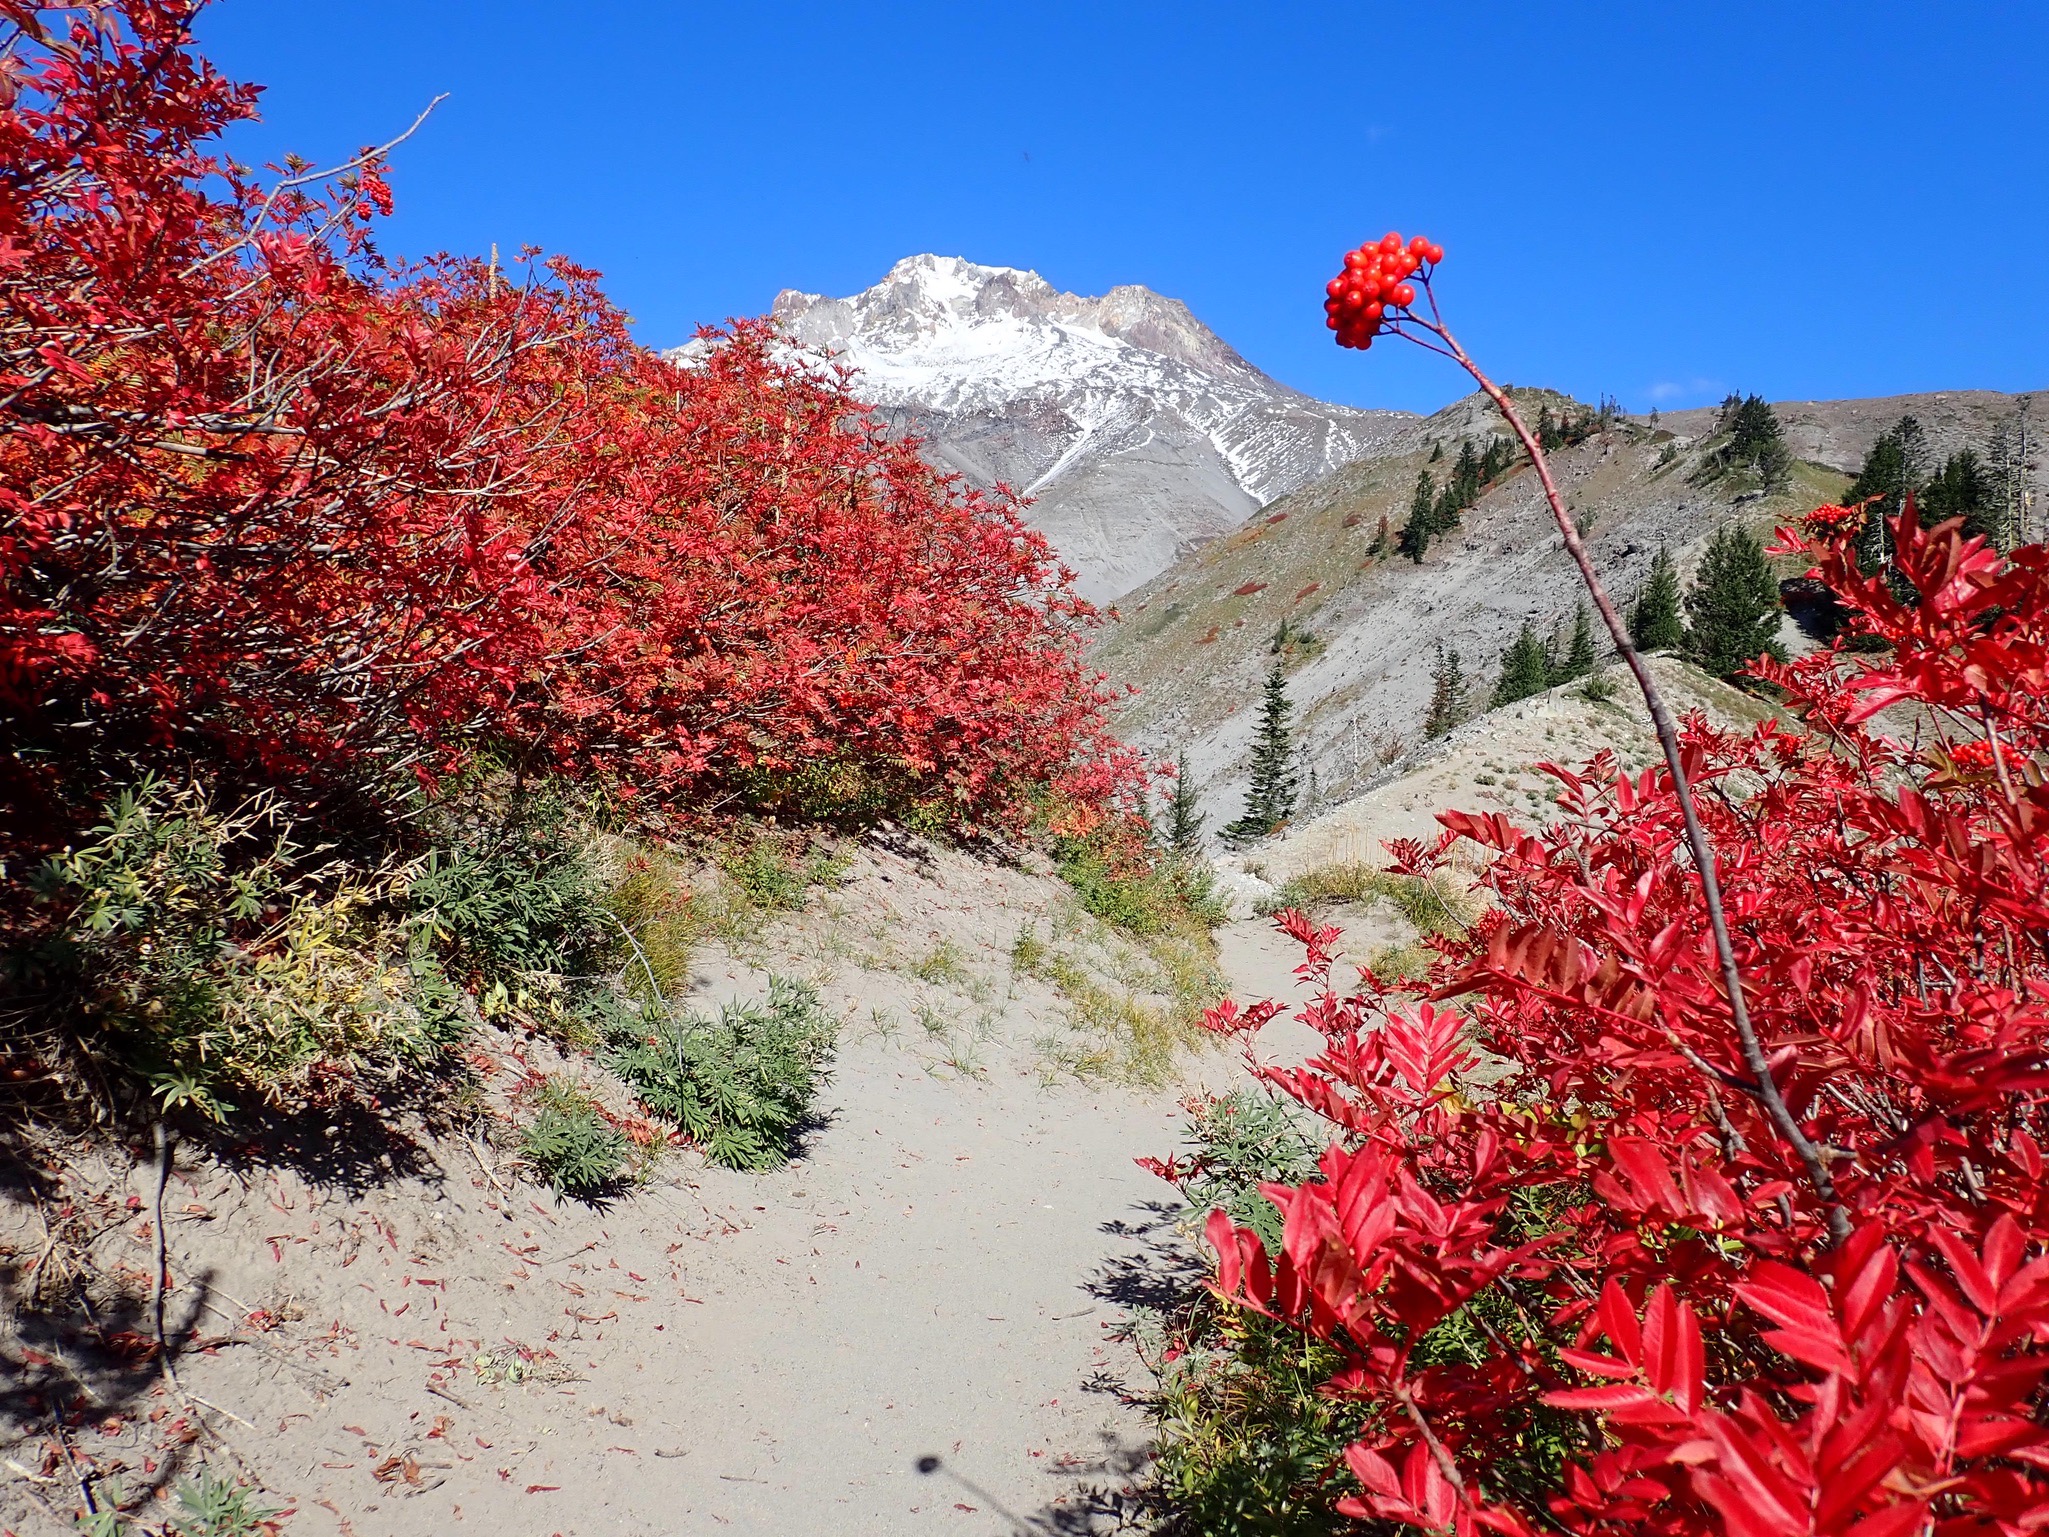 Red leaves and berries frame snow-capped Mount Hood against a bright blue sky.